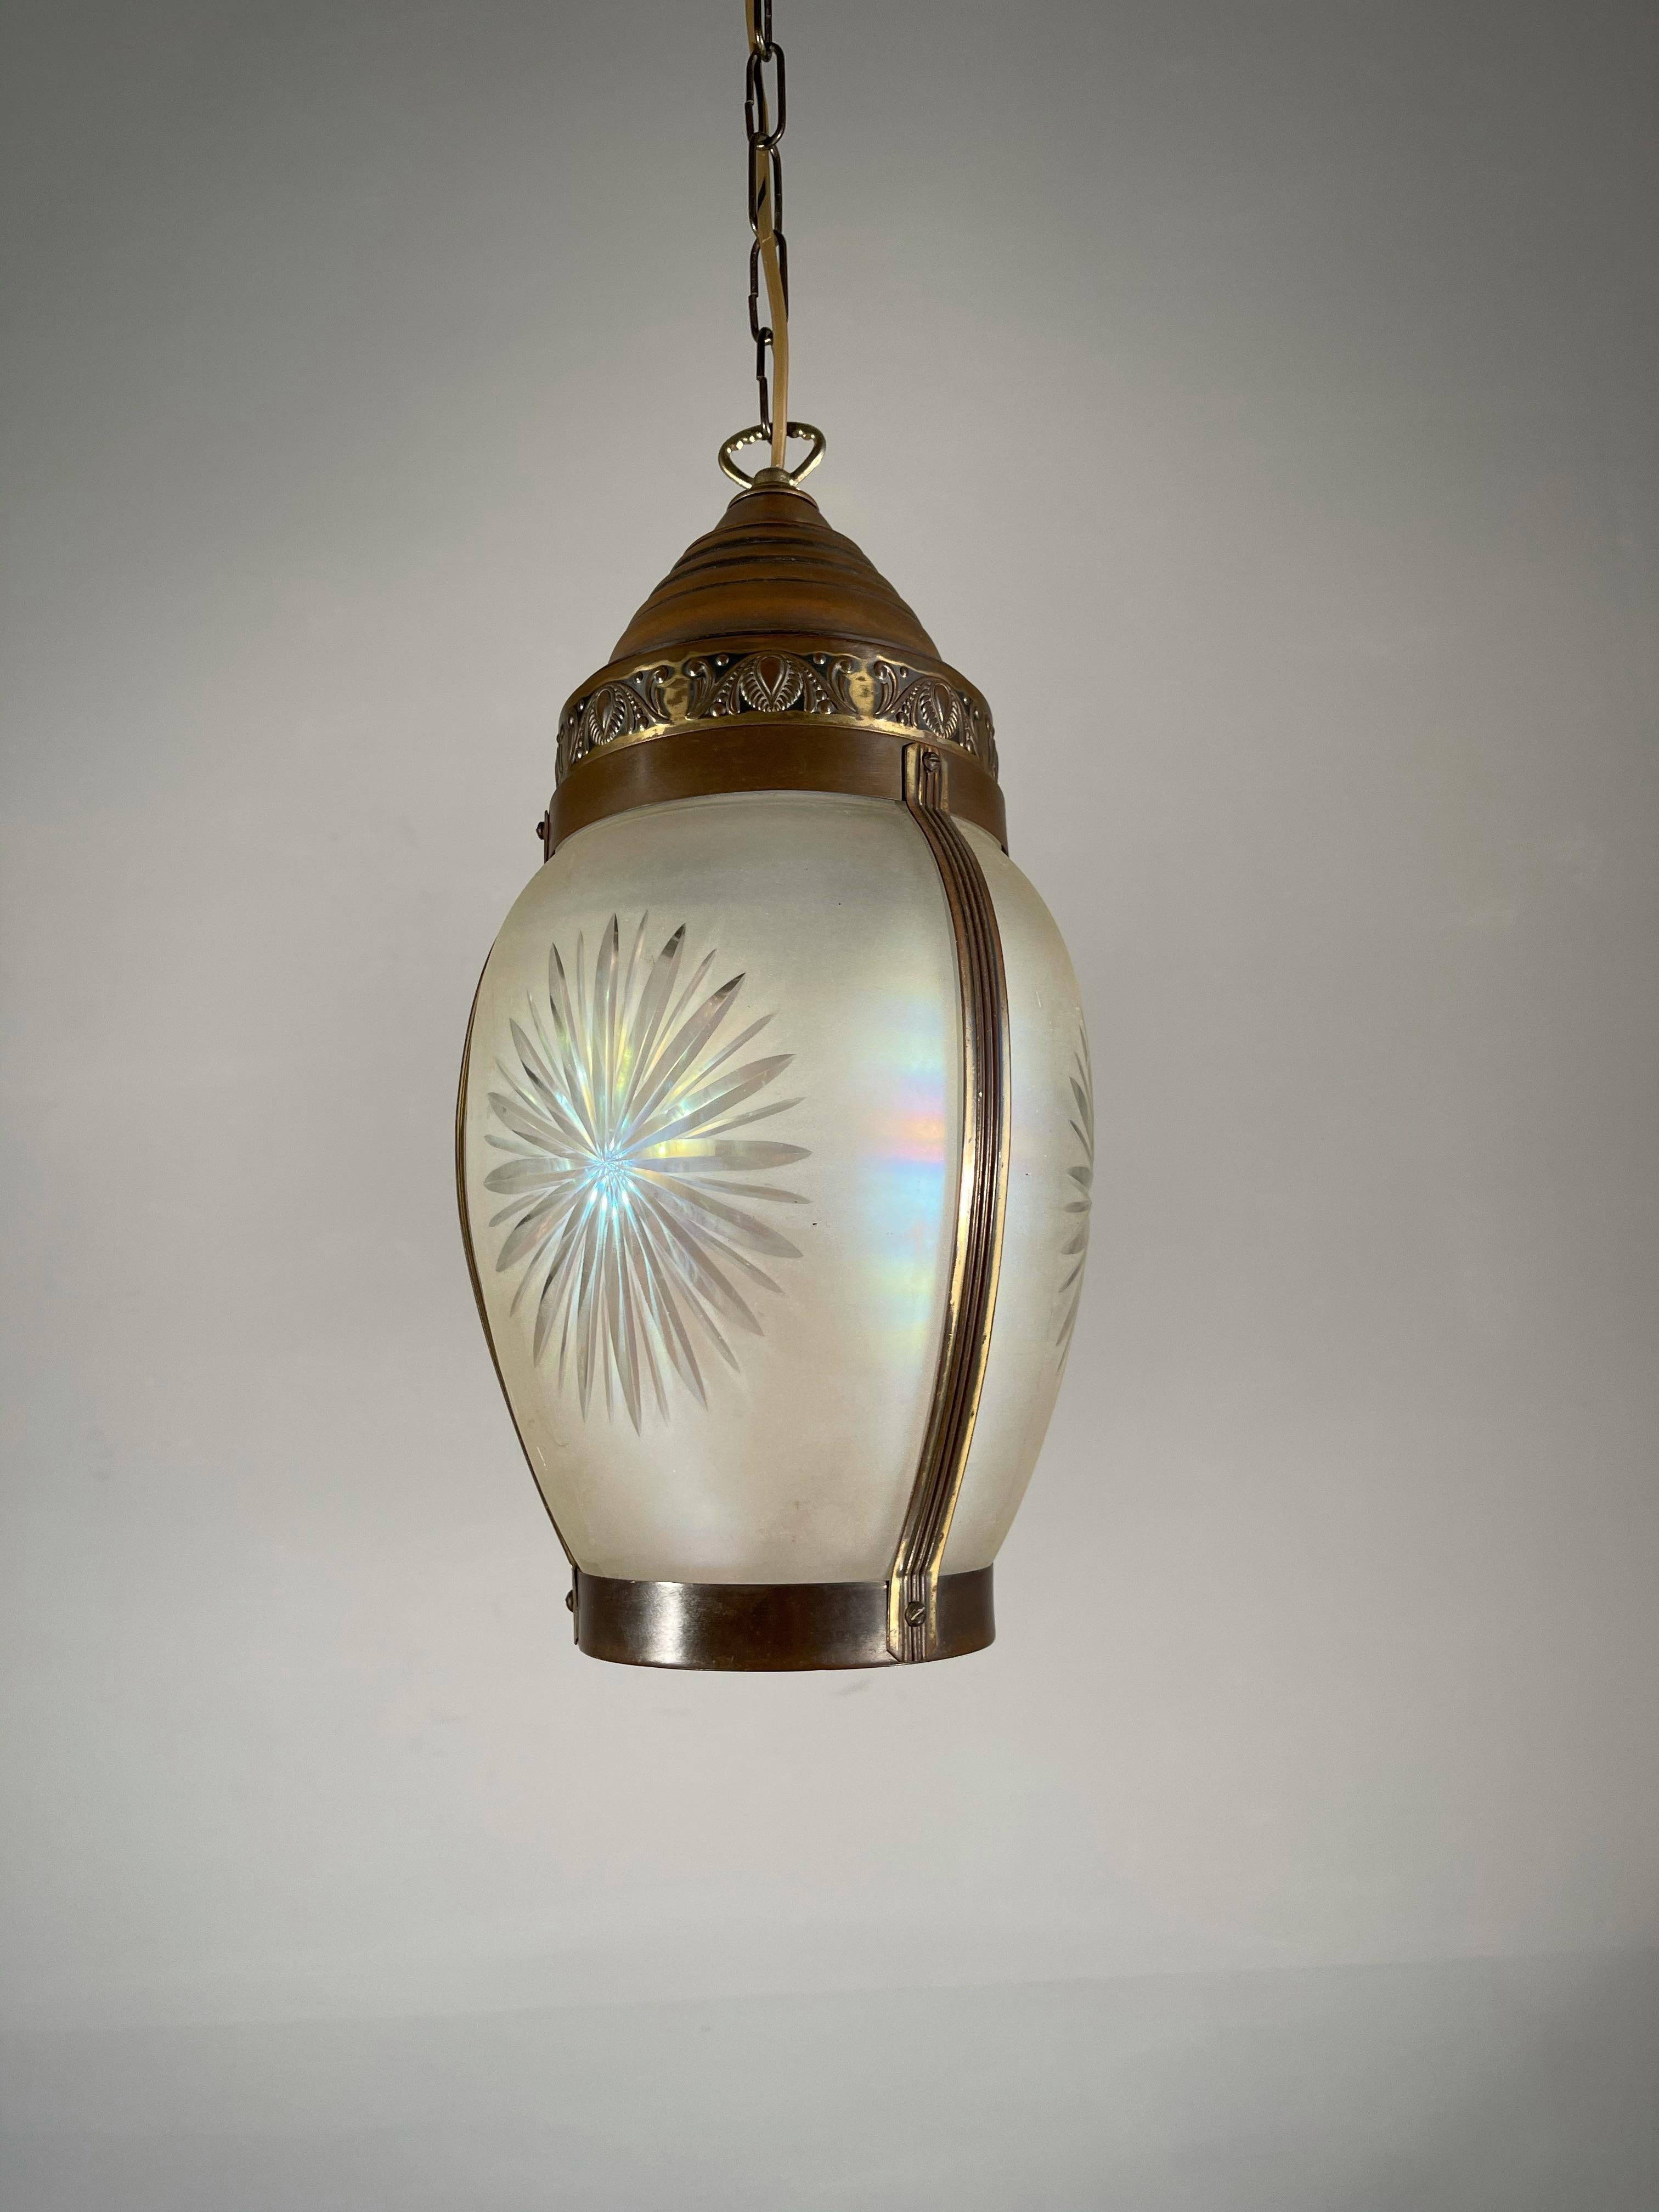 Wonderful turn of the century pendant, circa 1900.

If you are looking for the ideal pendant to light up your entrance, restroom or small bedroom than look no further. This European, Art Nouveau pendant is beautiful in shape and materials and it